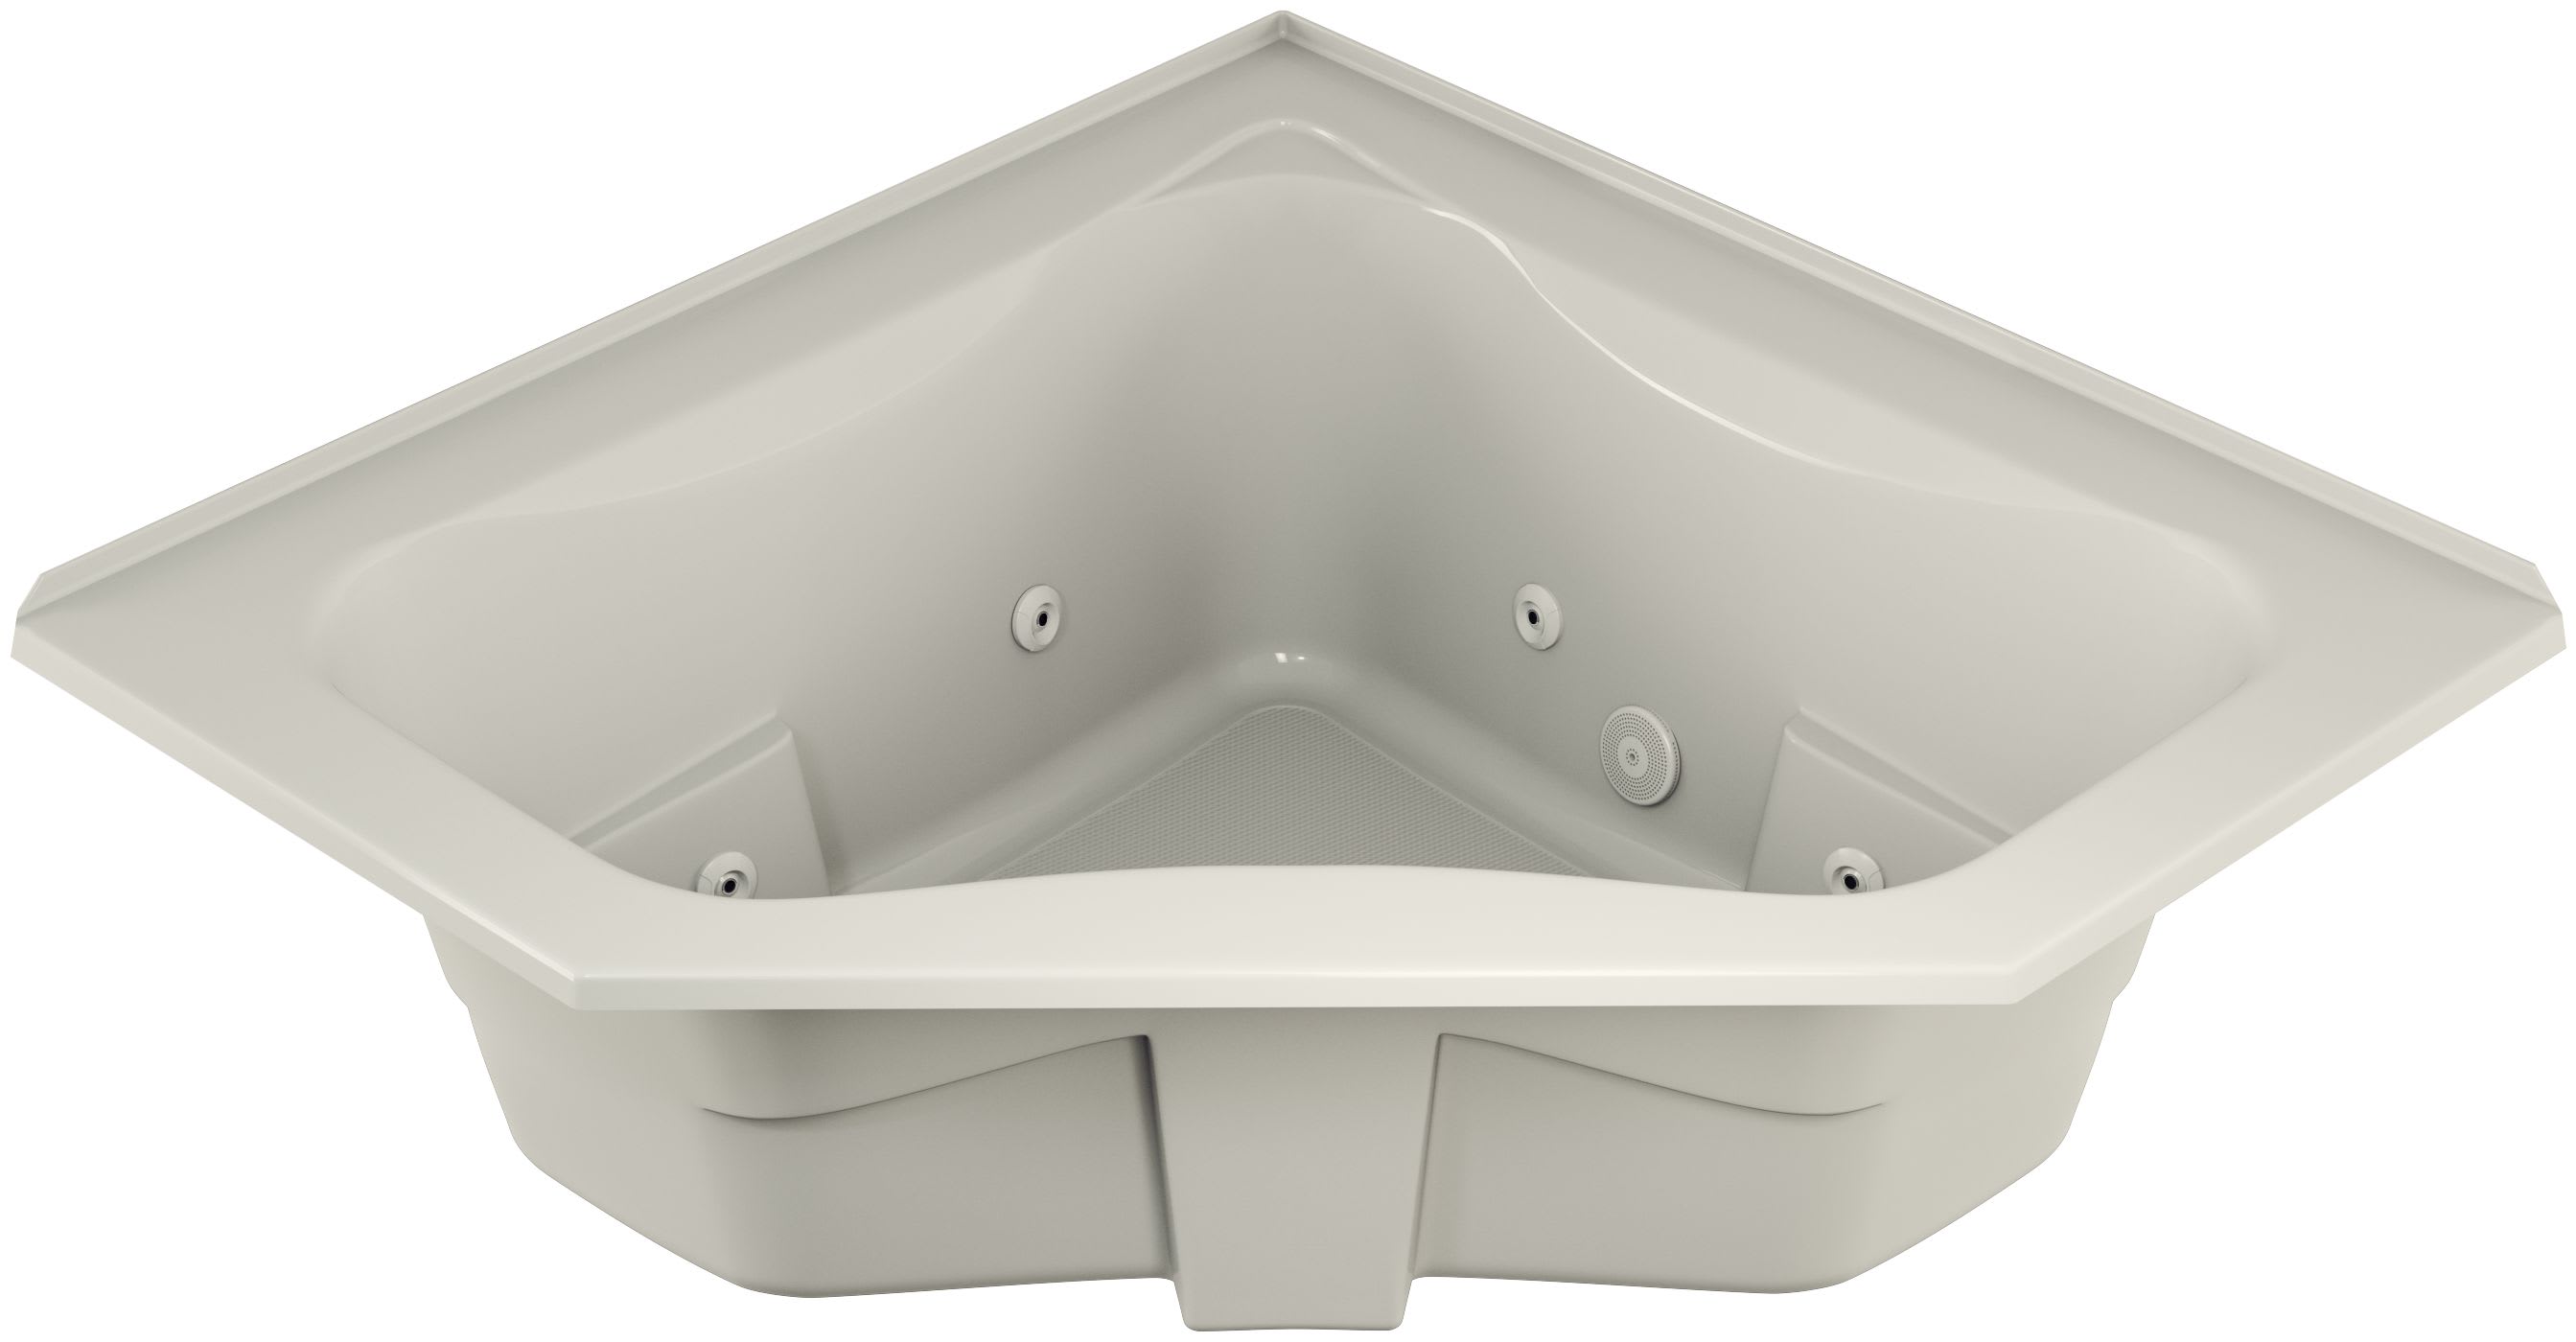 Jacuzzi J5t6060wcr1hxa Almond 60 X 60 Signature Corner Whirlpool Bathtub With 6 Jets Air Controls Rapidheat Water Heater Center Drain Tiling Flange And Right Pump Faucetdirect Com